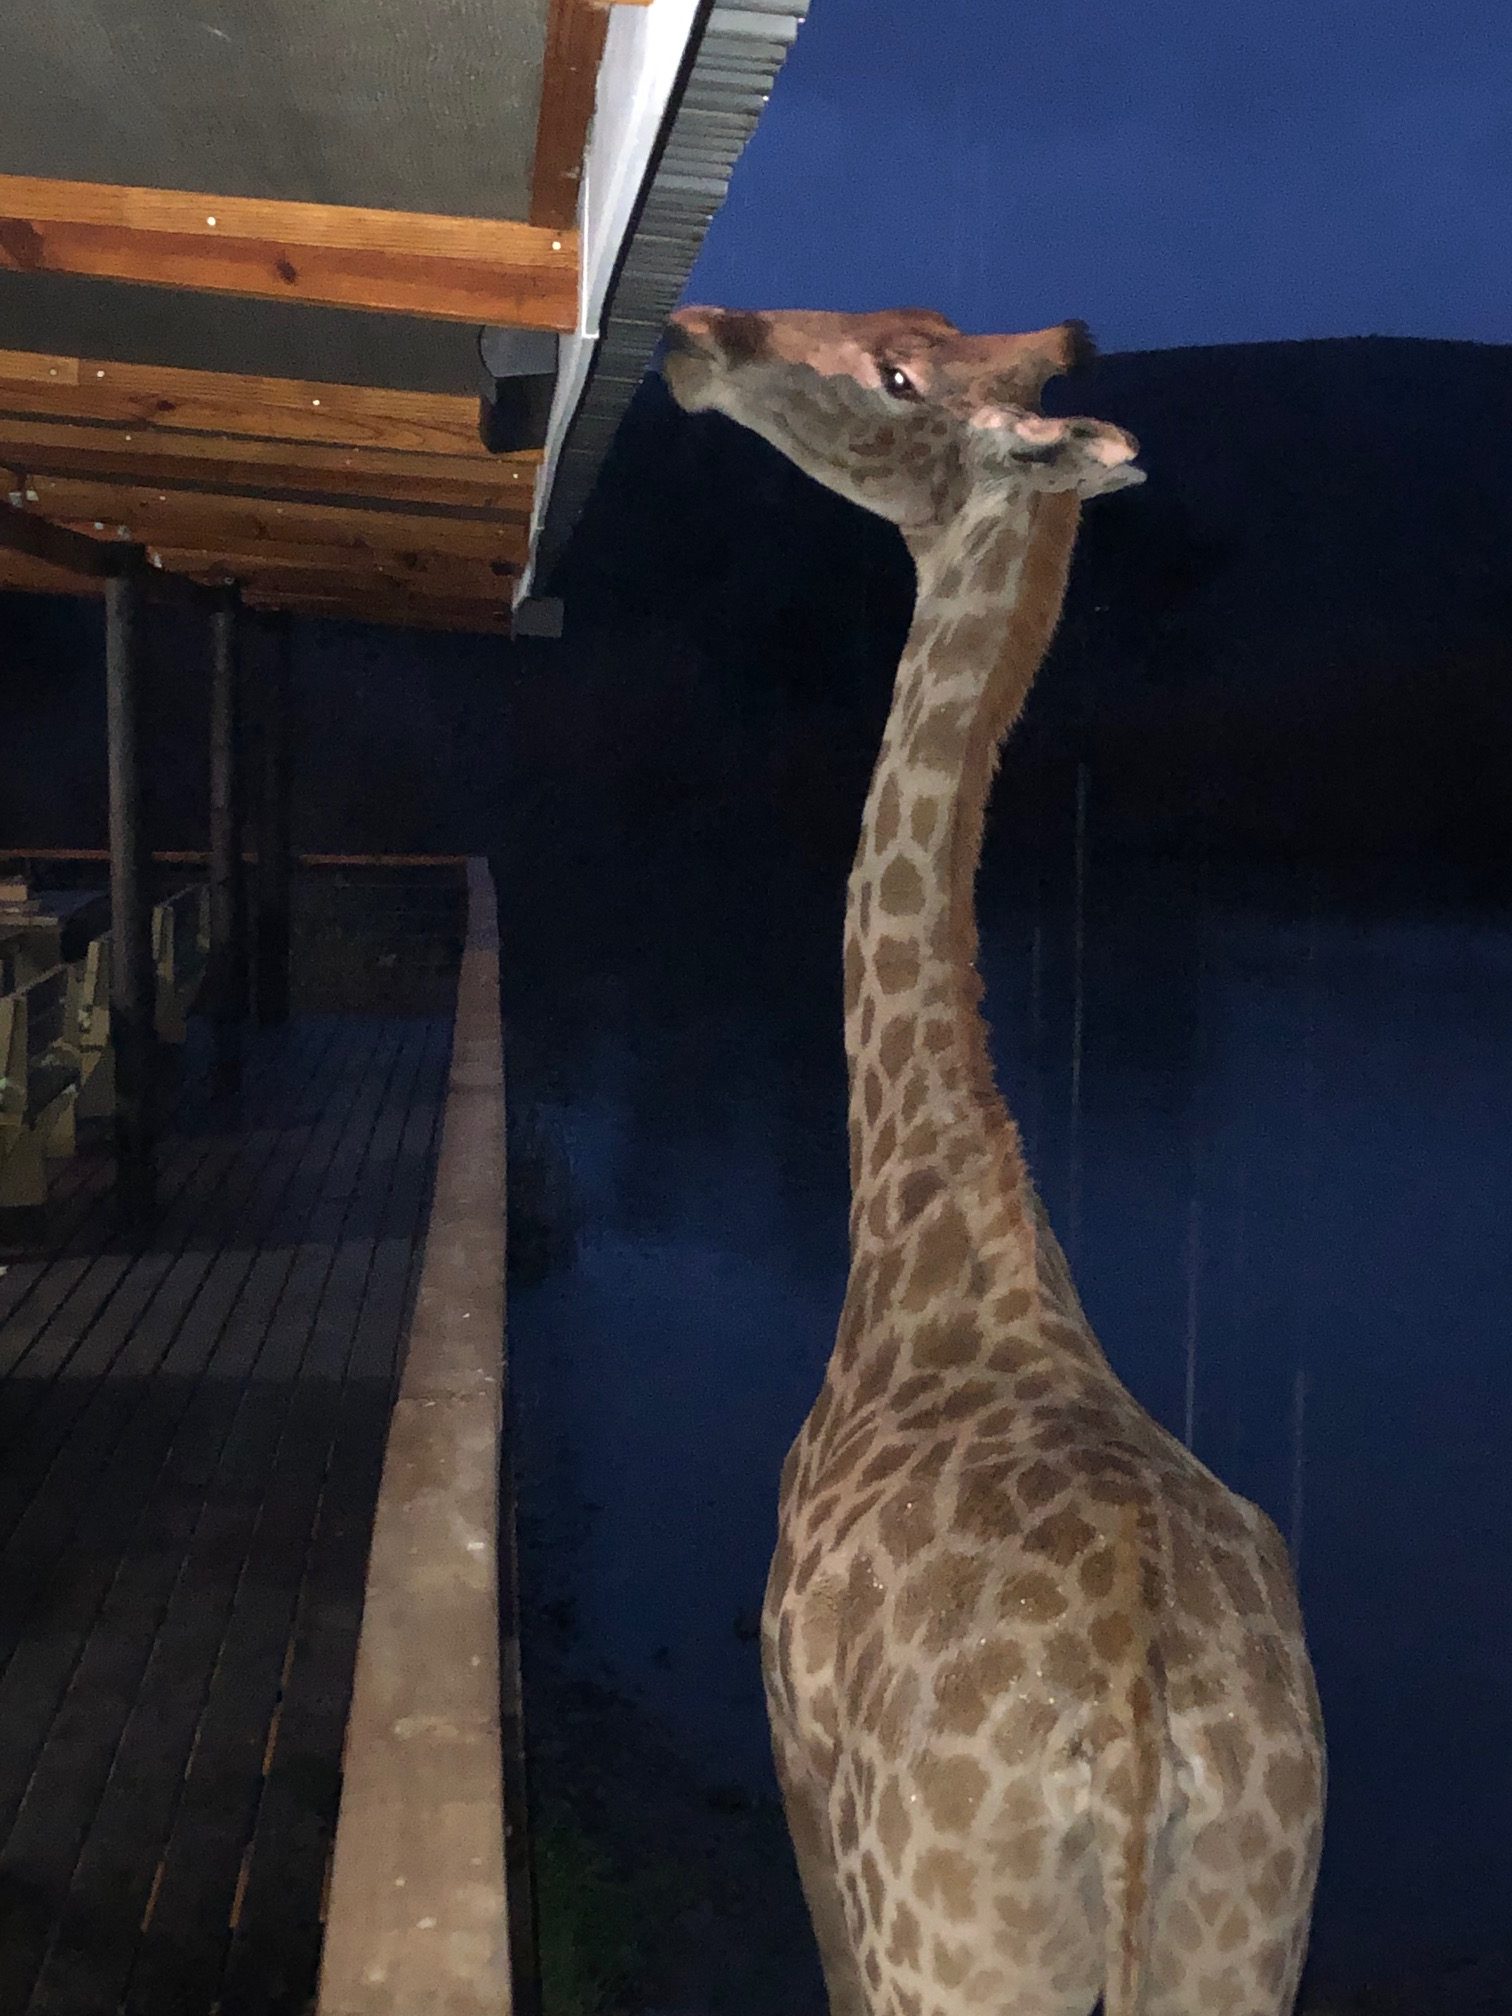 giraffe standing next to a building, with its head near the roof